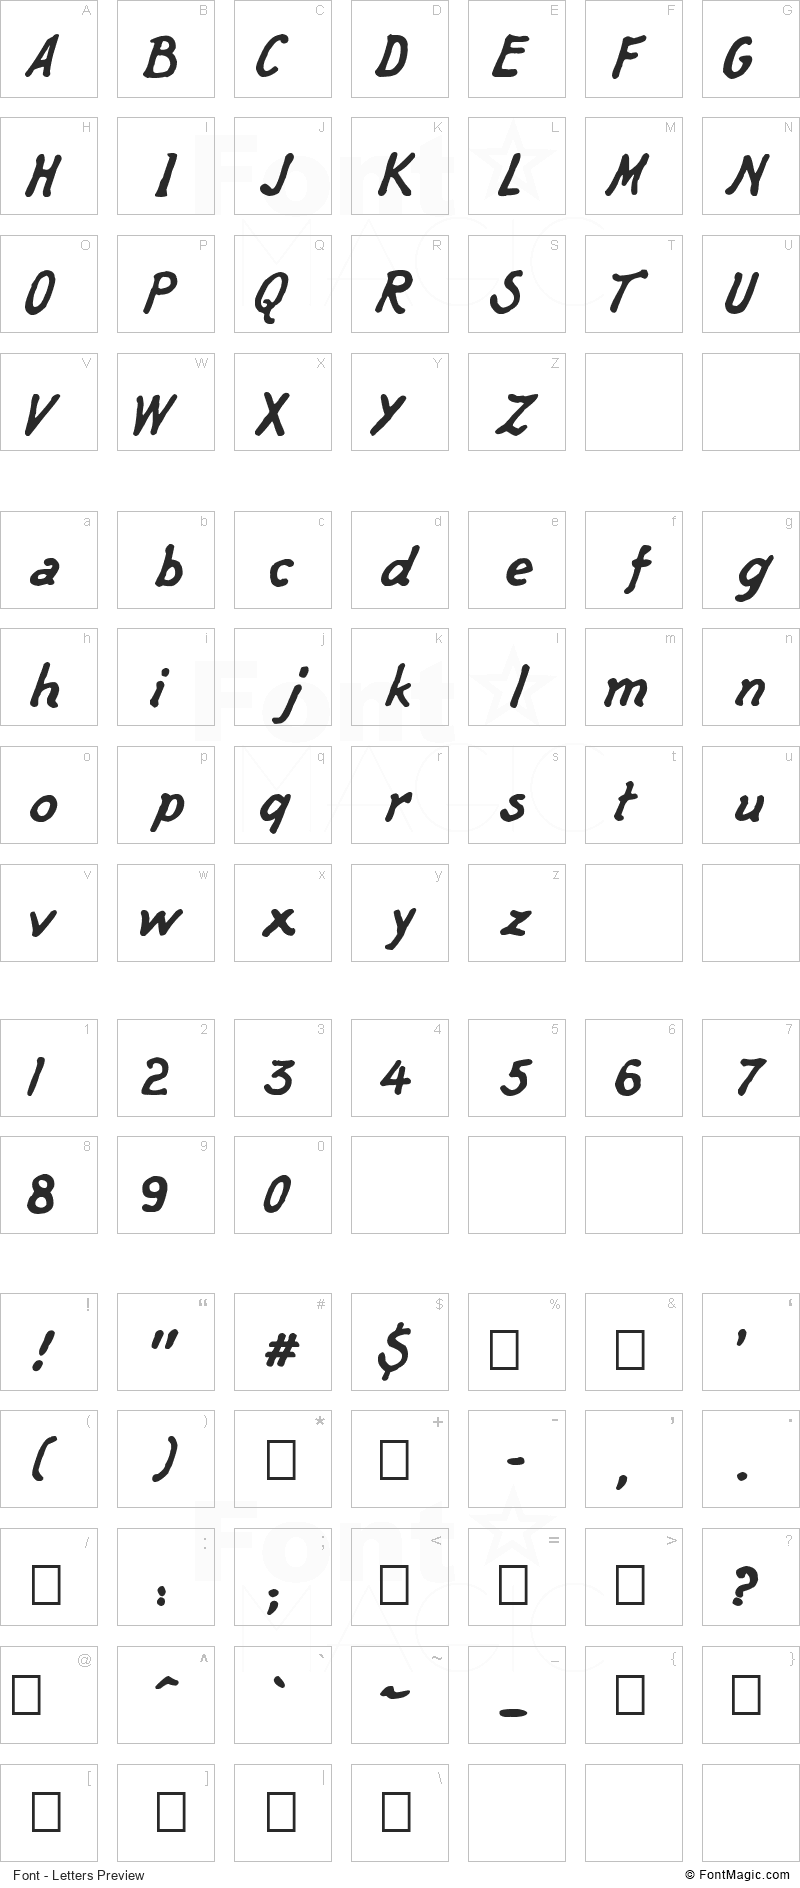 Captain’s Talk Font - All Latters Preview Chart